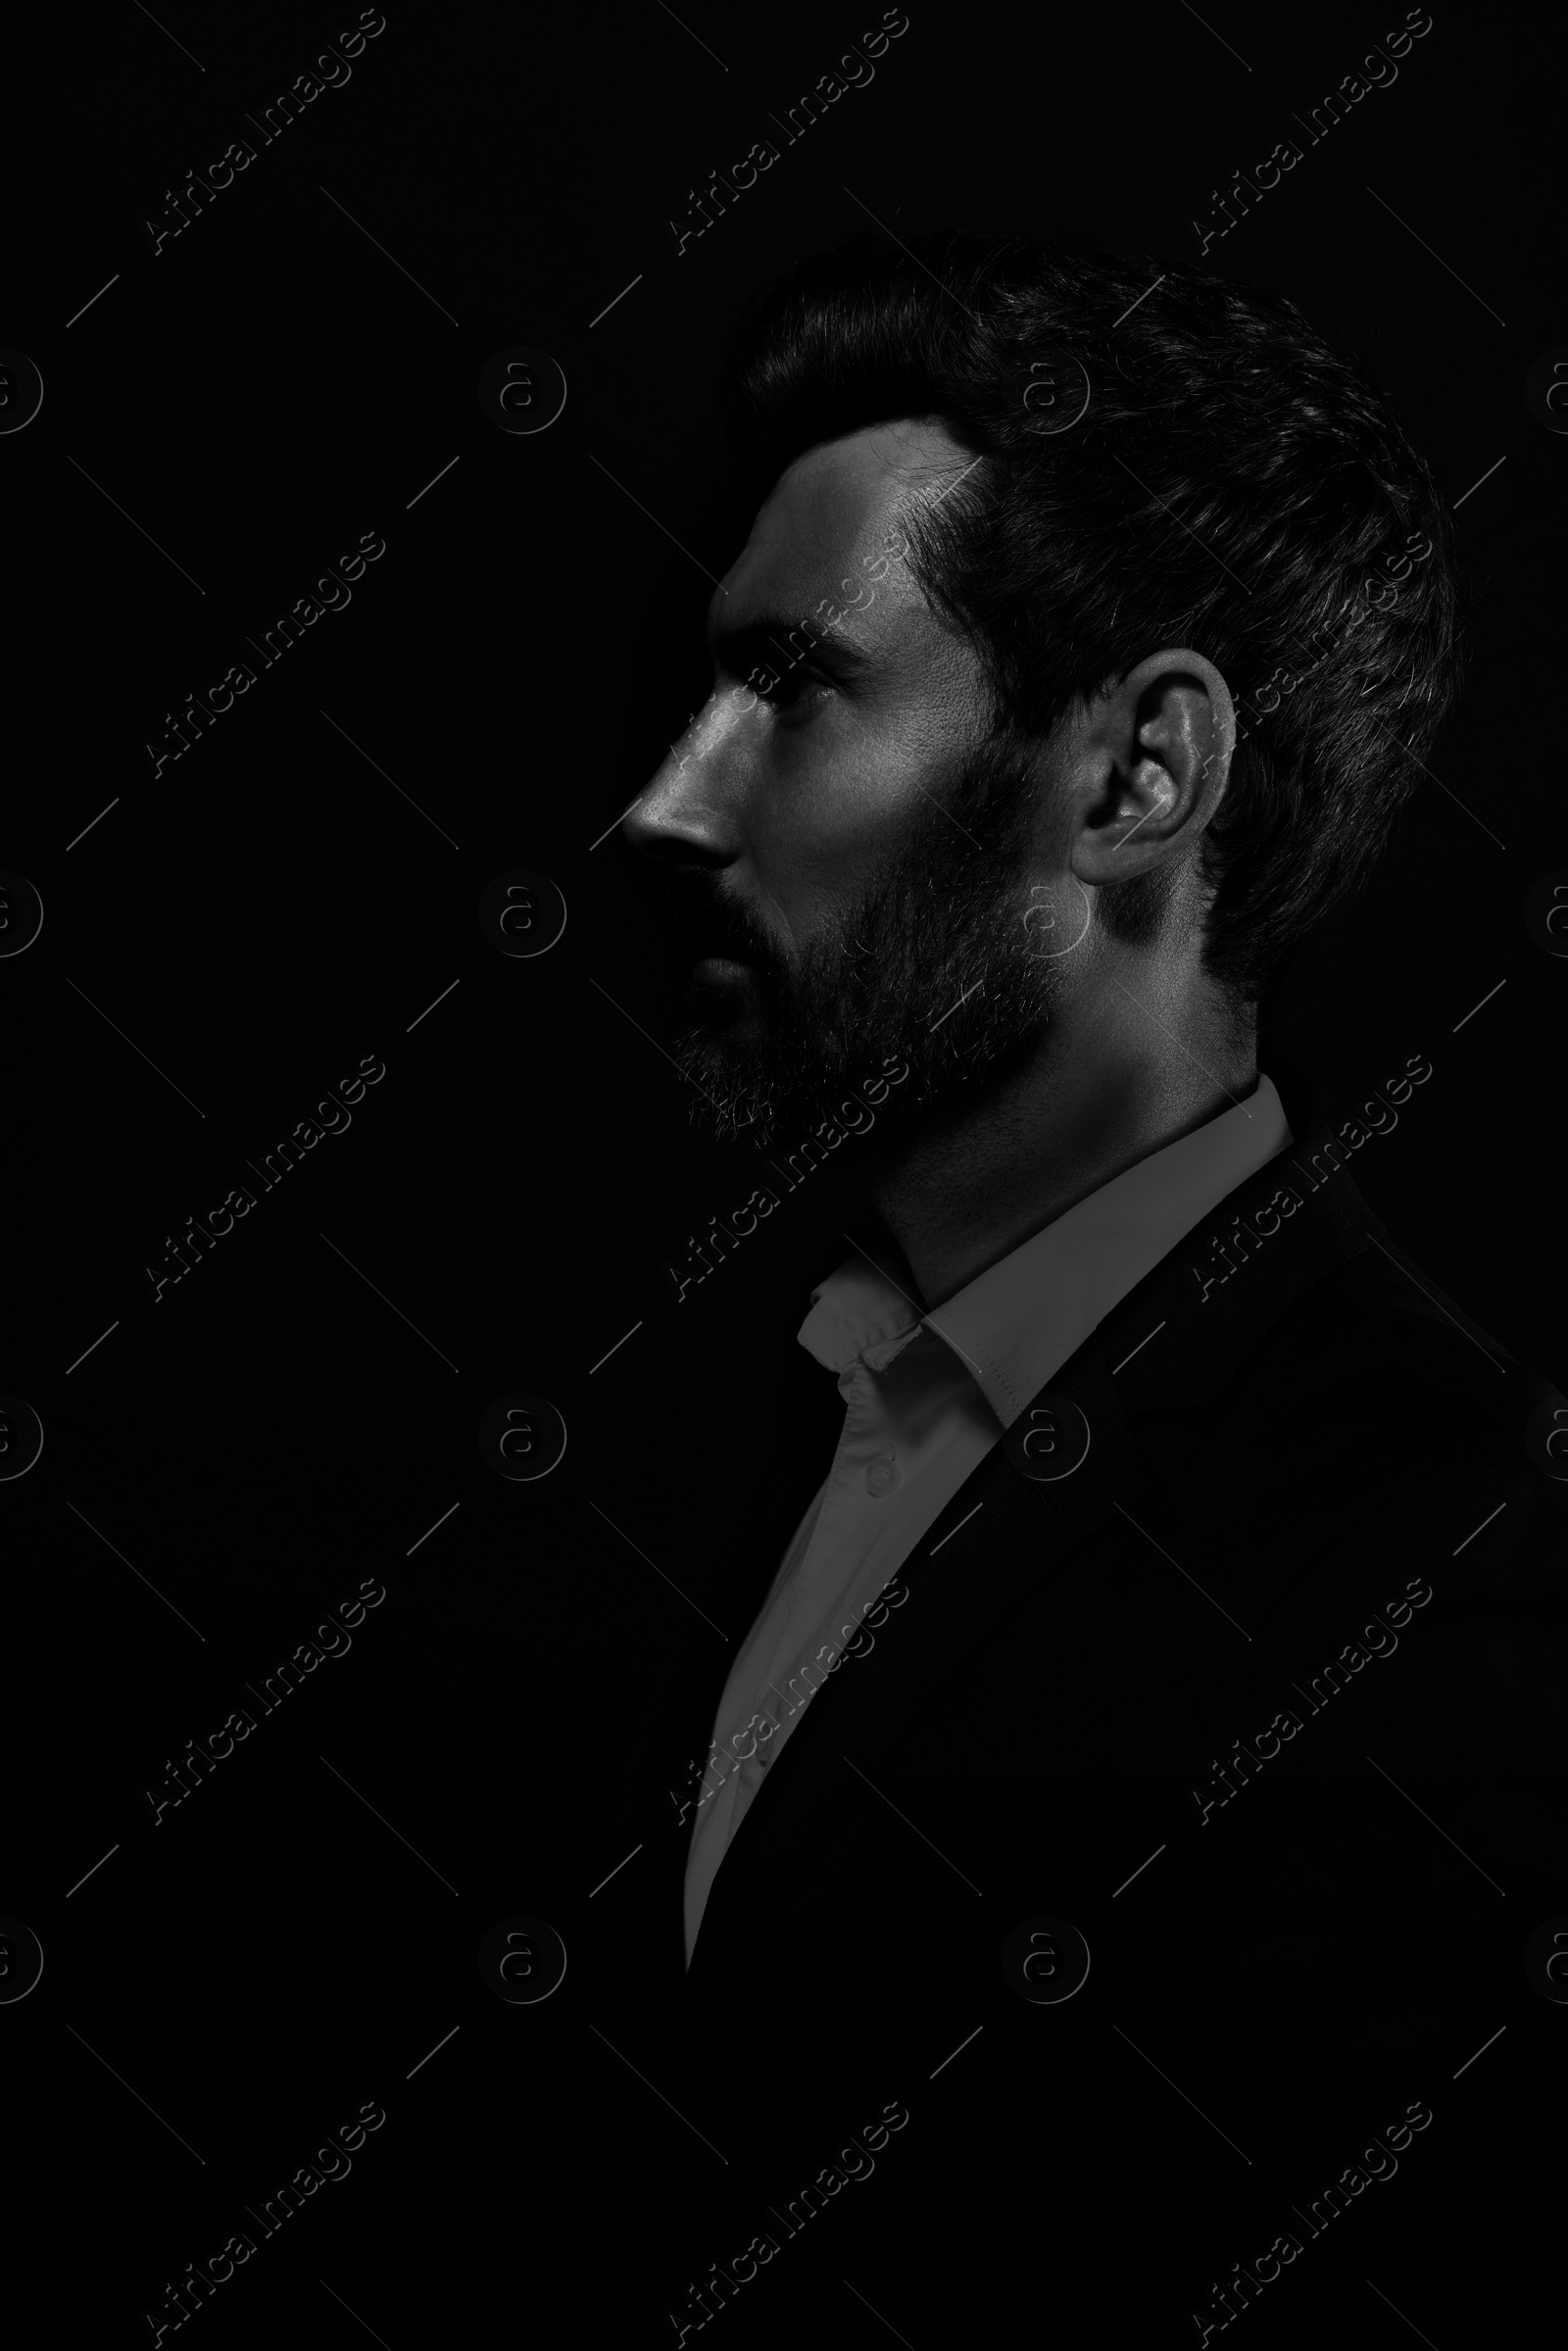 Image of Silhouette of man in darkness. Portrait on black background